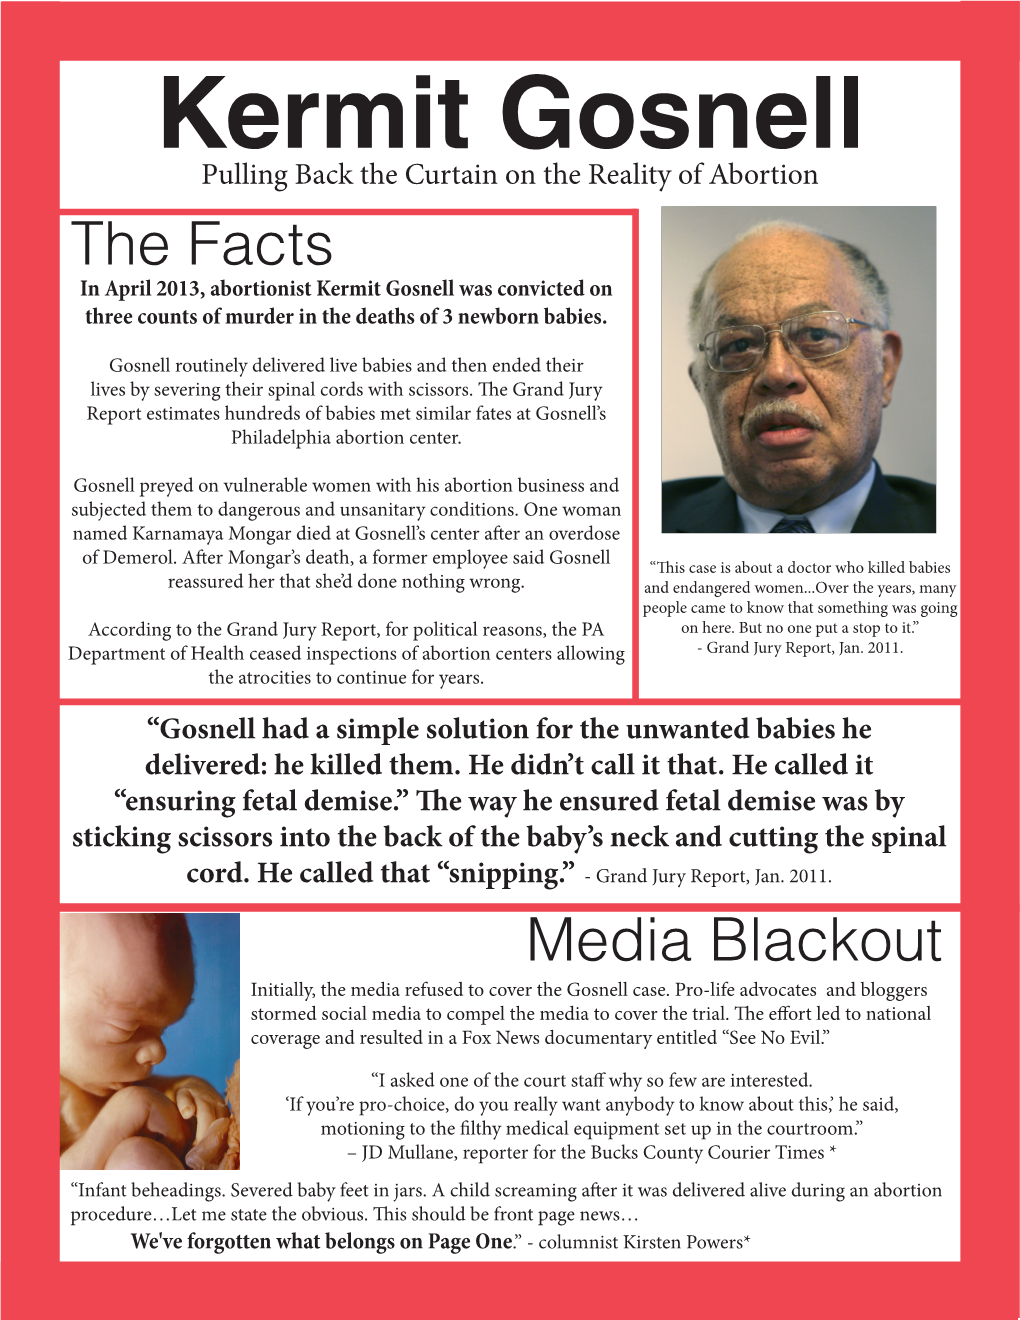 Kermit Gosnell Reassured Her That She’D Done Nothing Wrong